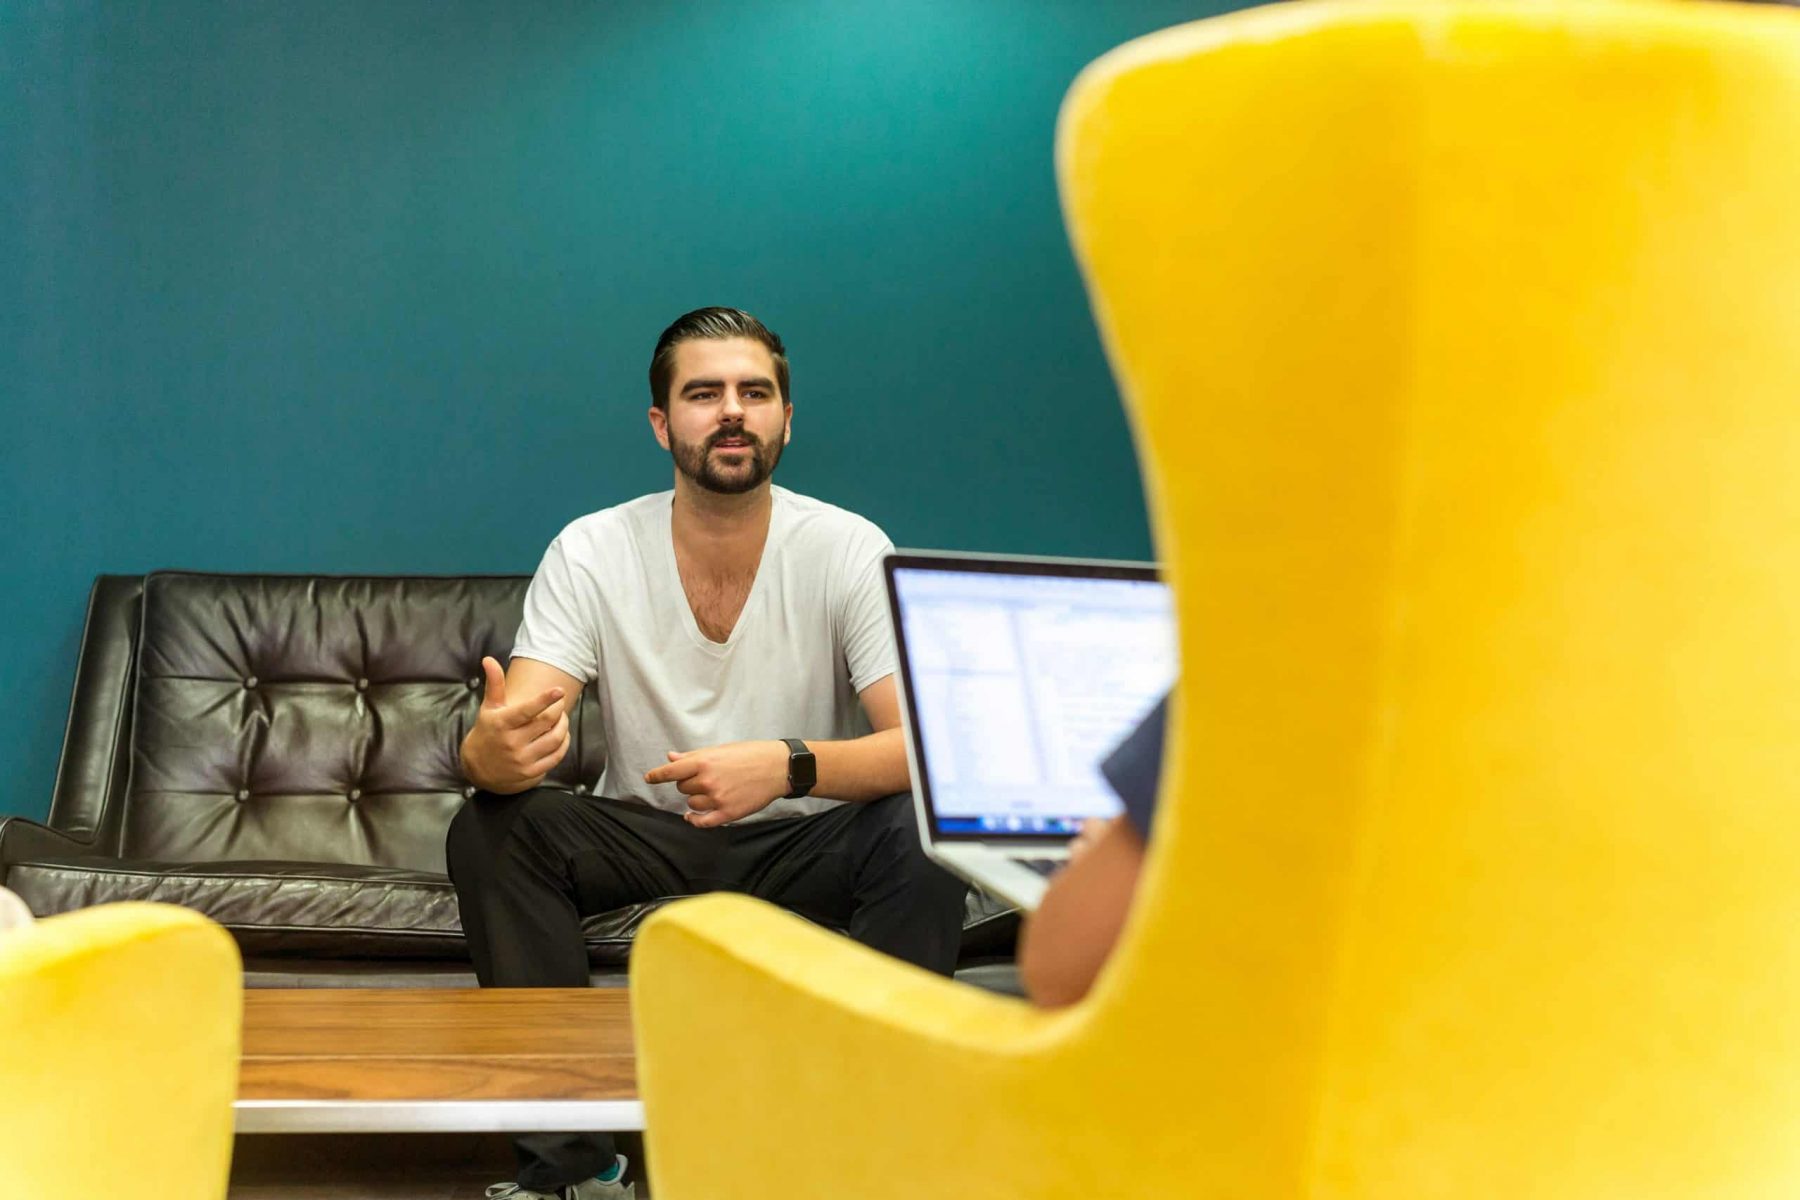 man interviewing in front of person in yellow chair with laptop